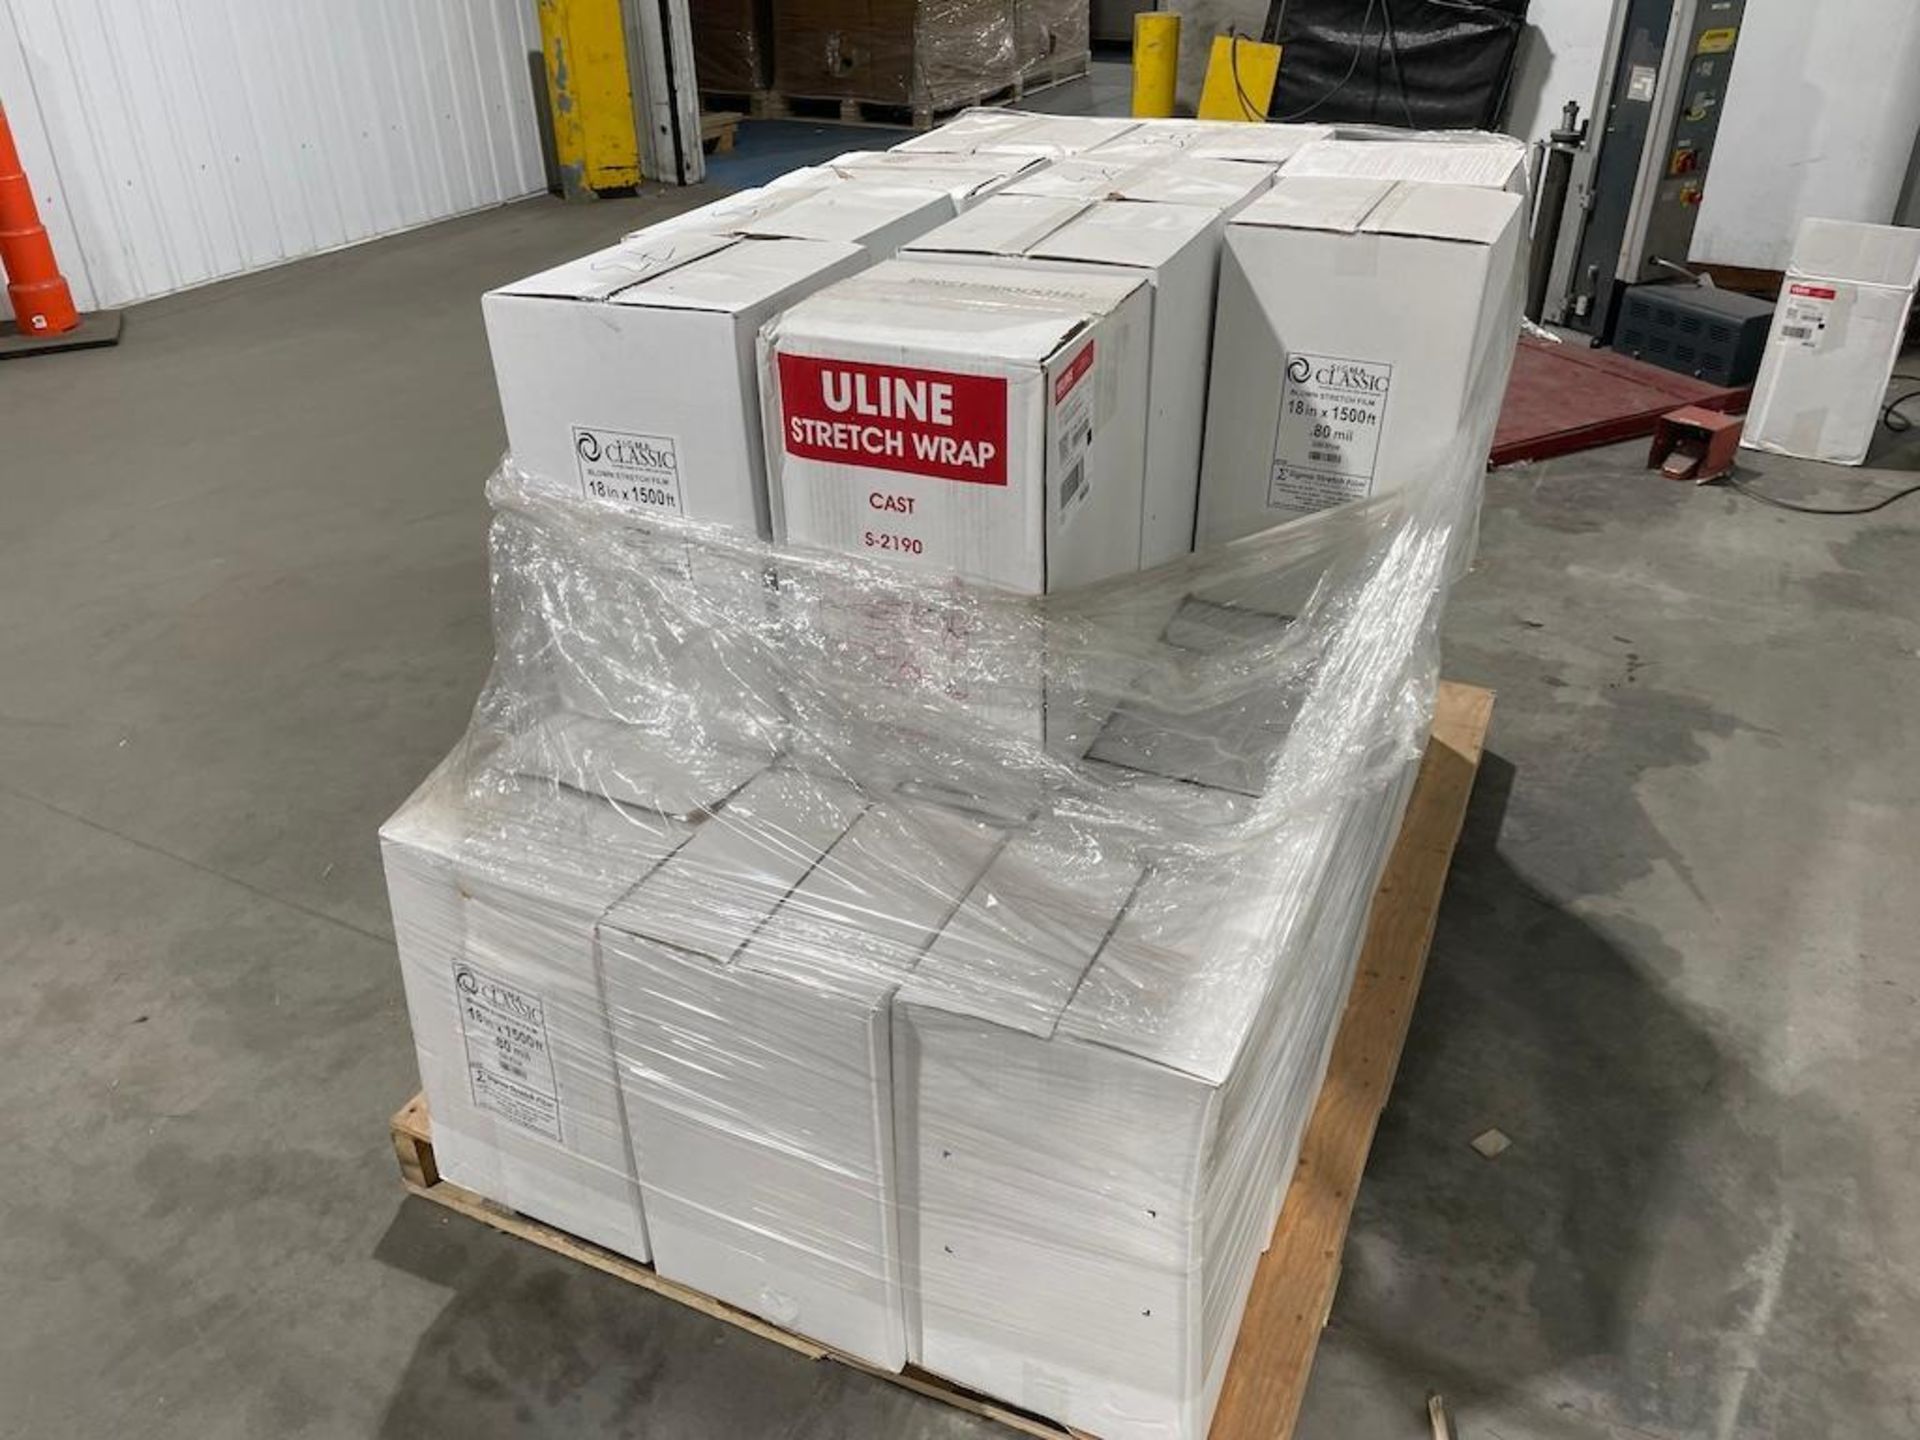 WULFTEC PALLET WRAPPER MODEL WVL-75, SN 68003-1-0610, W PALLET OF ULINE STRETCH WRAP [TROIS RIVIERES - Image 3 of 4